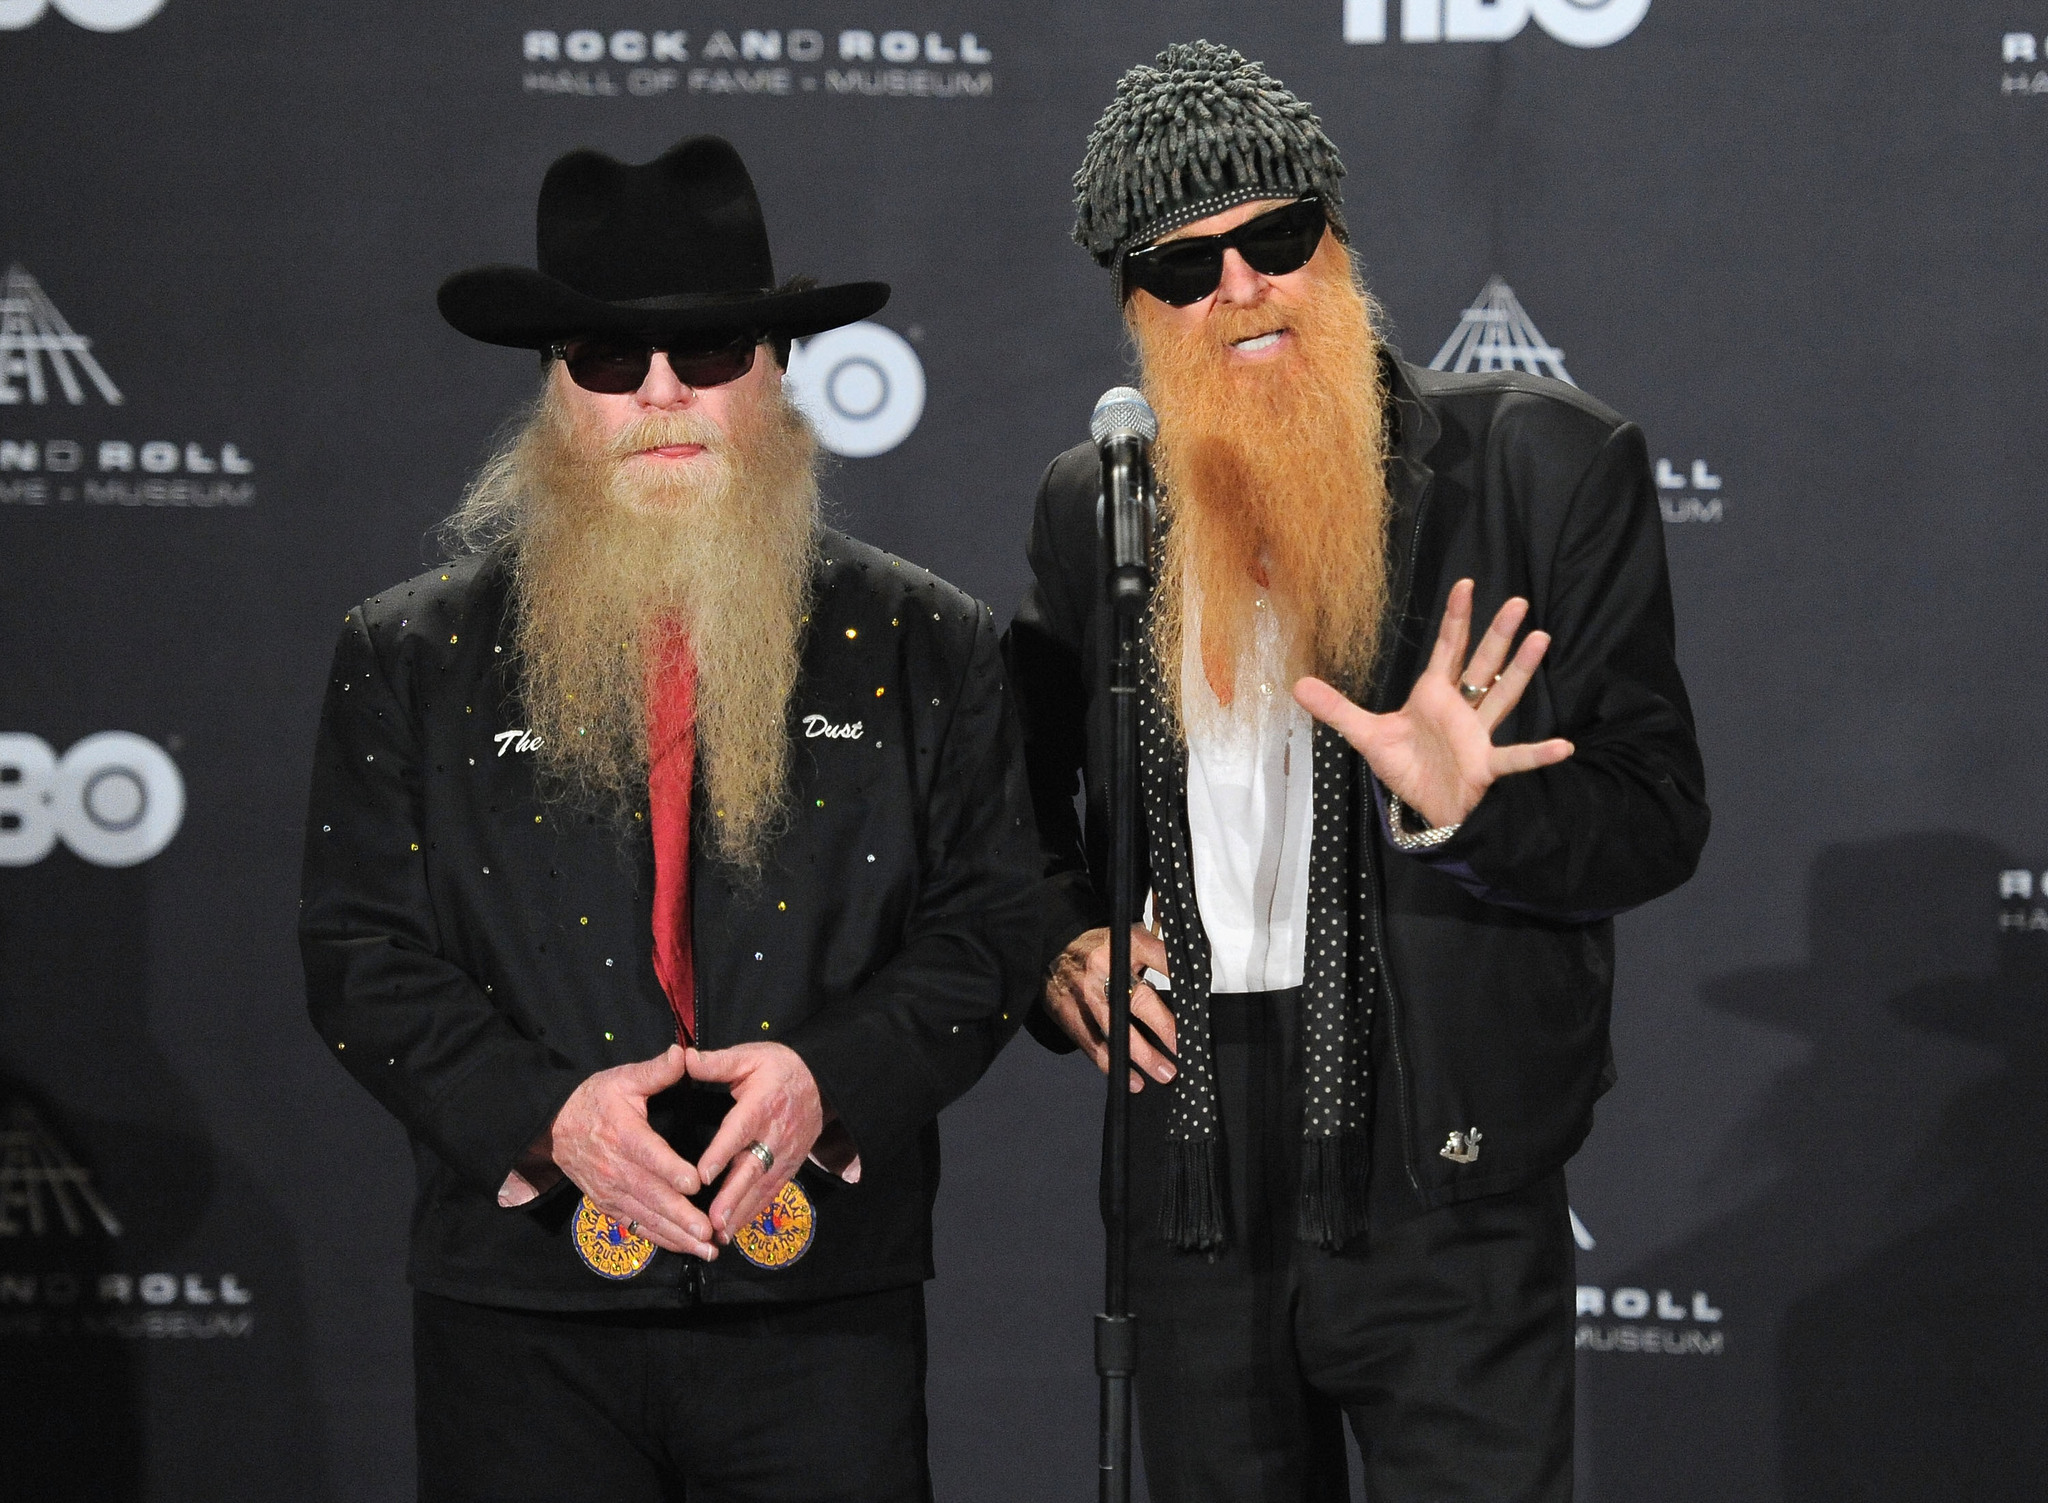 Billy Gibbons and Dusty Hill